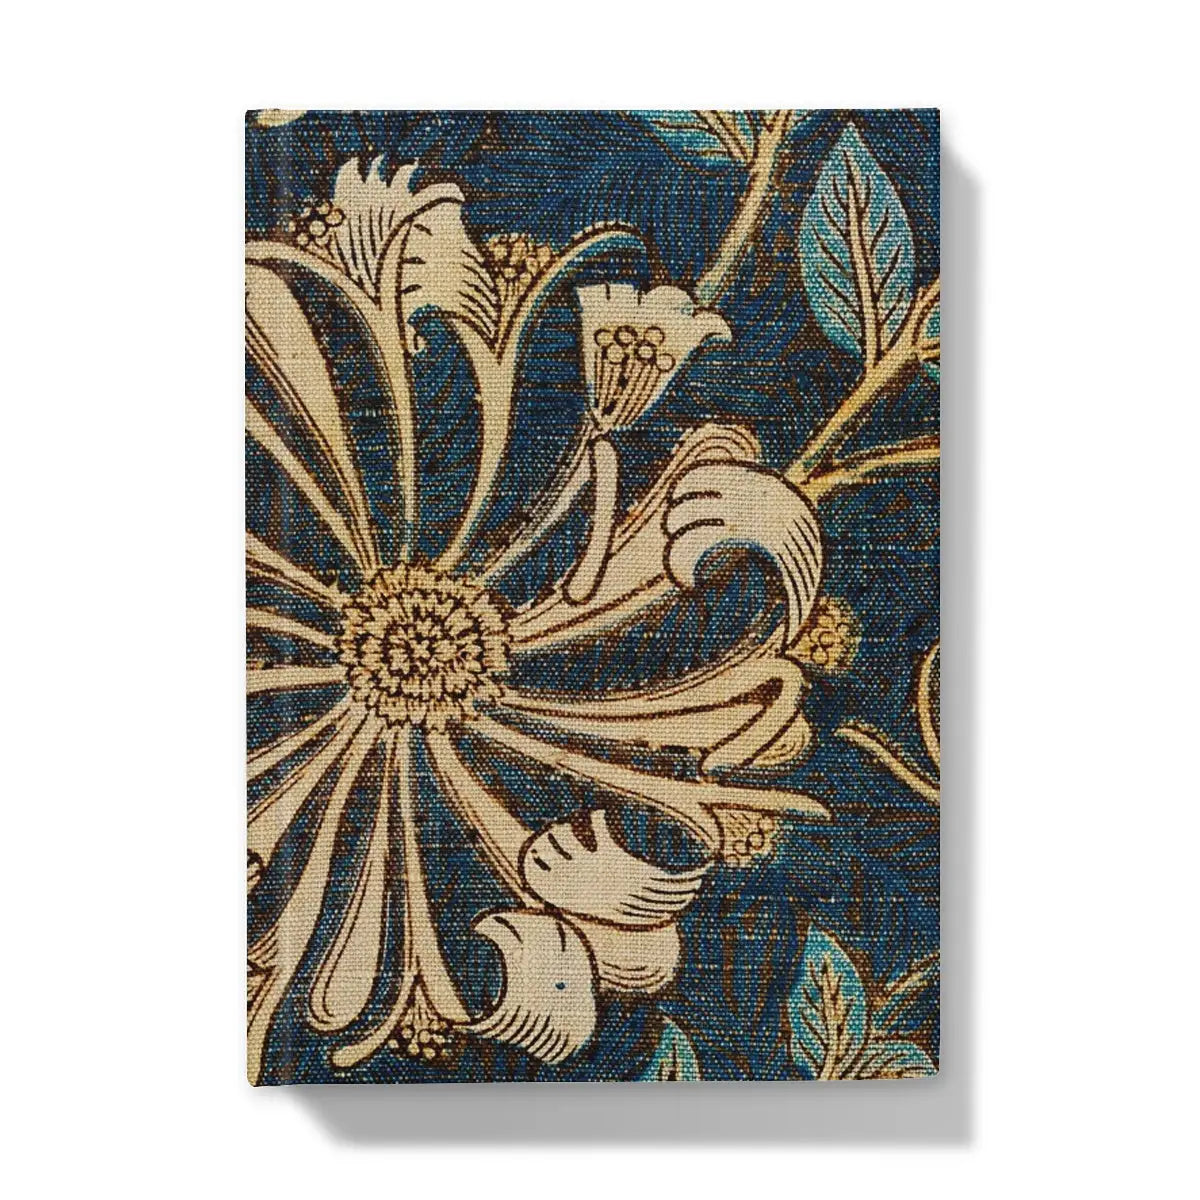 Honeysuckle 3 - William Morris Floral Aesthetic Journal - 5’x7’ / 5’ x 7’ - Lined Paper - Notebooks & Notepads